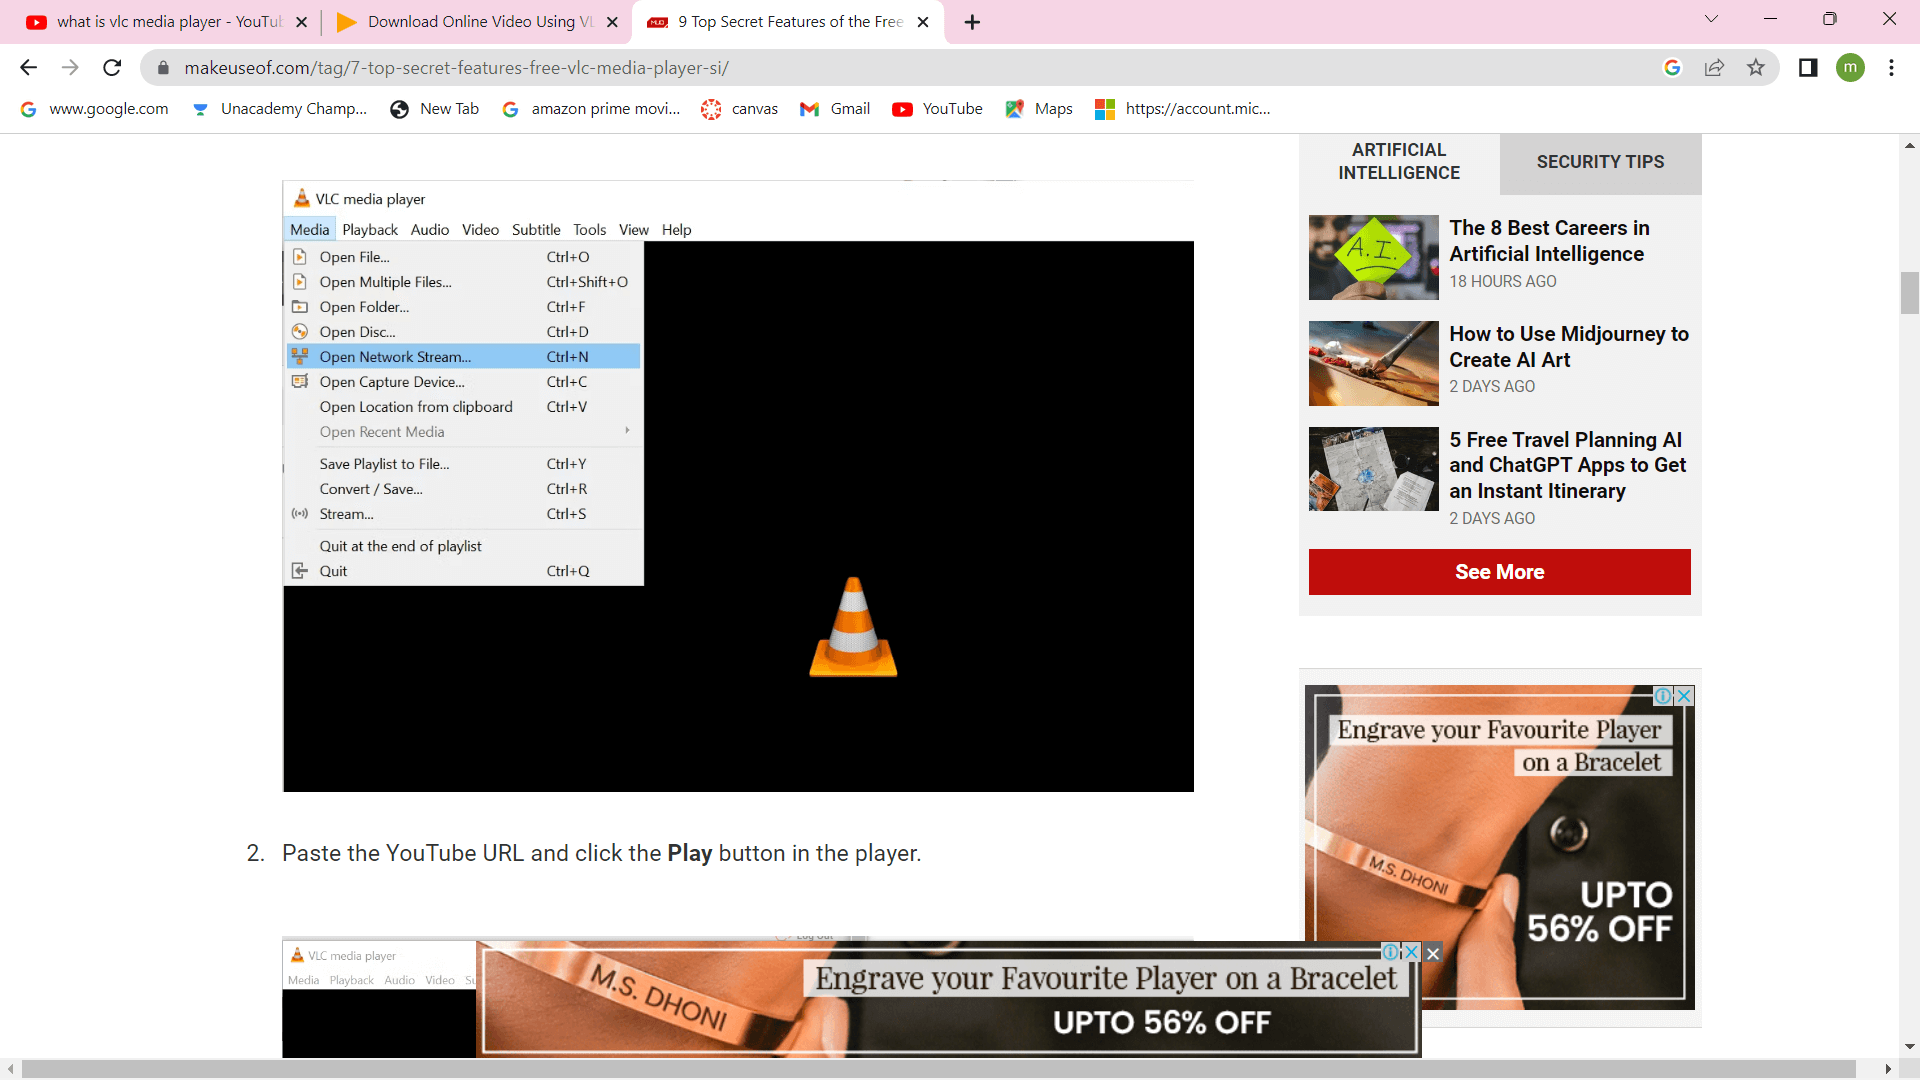 How to Save Videos from VLC